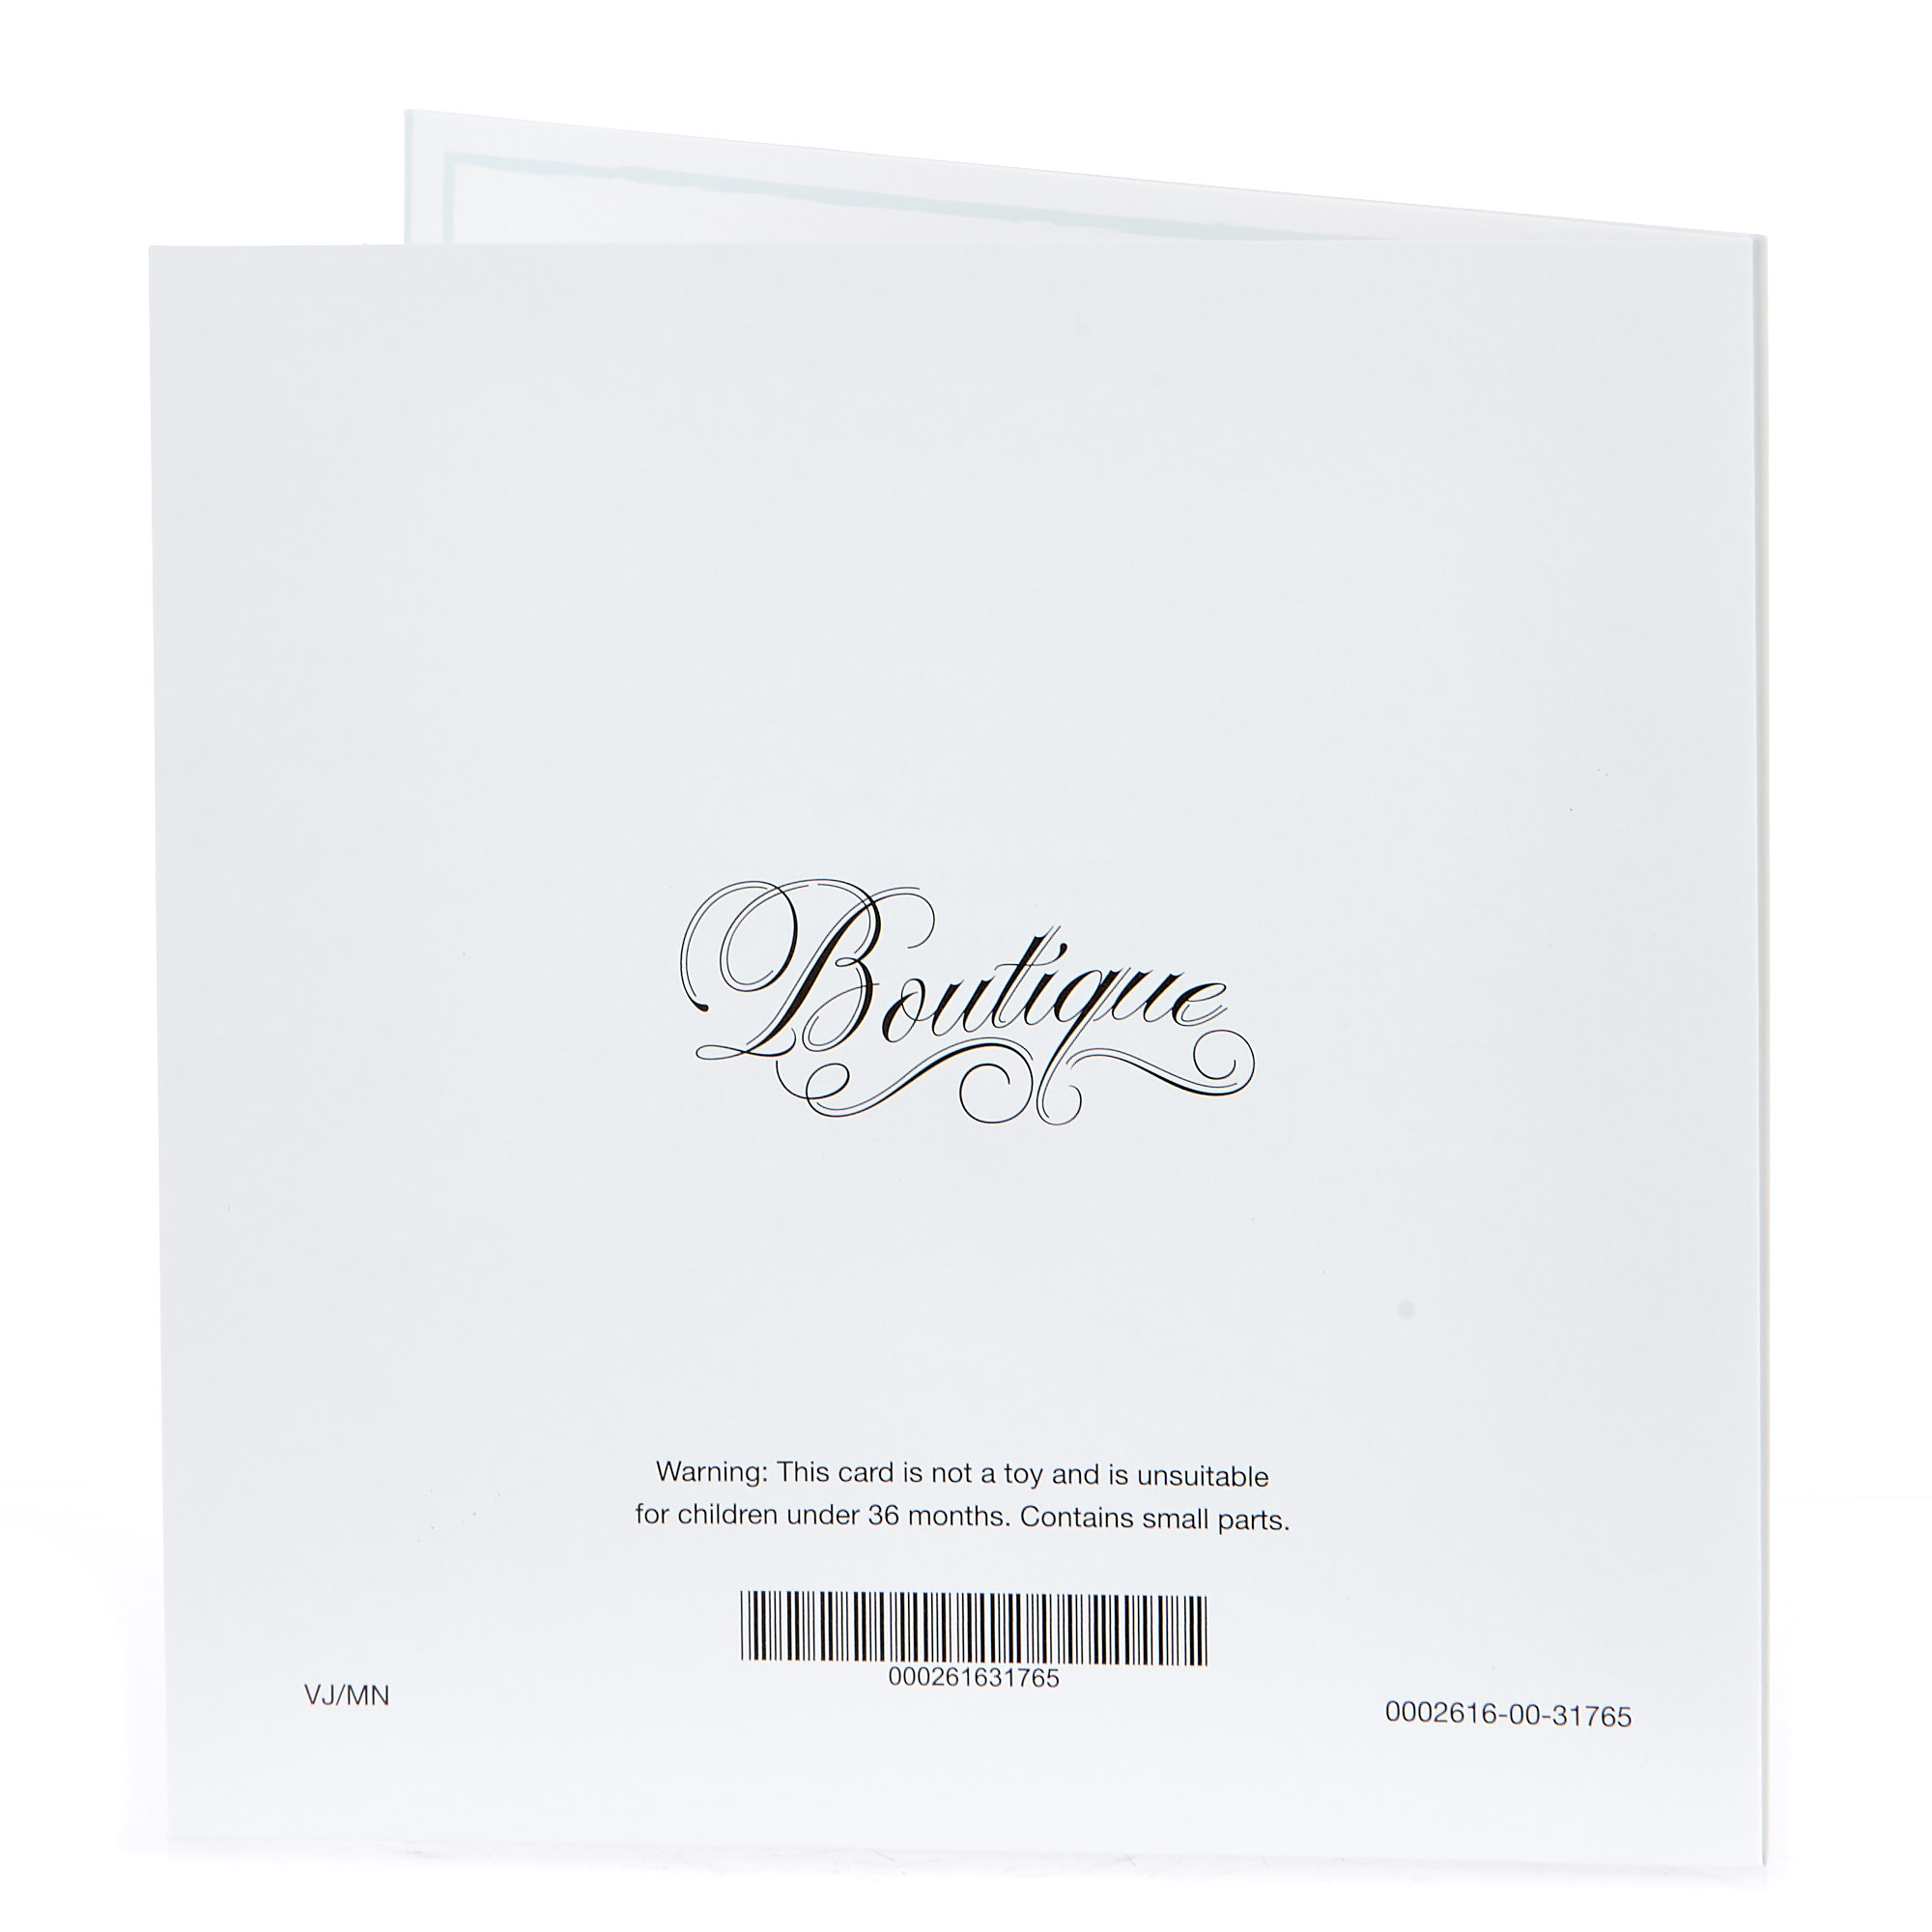 Boutique Collection Anniversary Card - Son & Daughter In Law